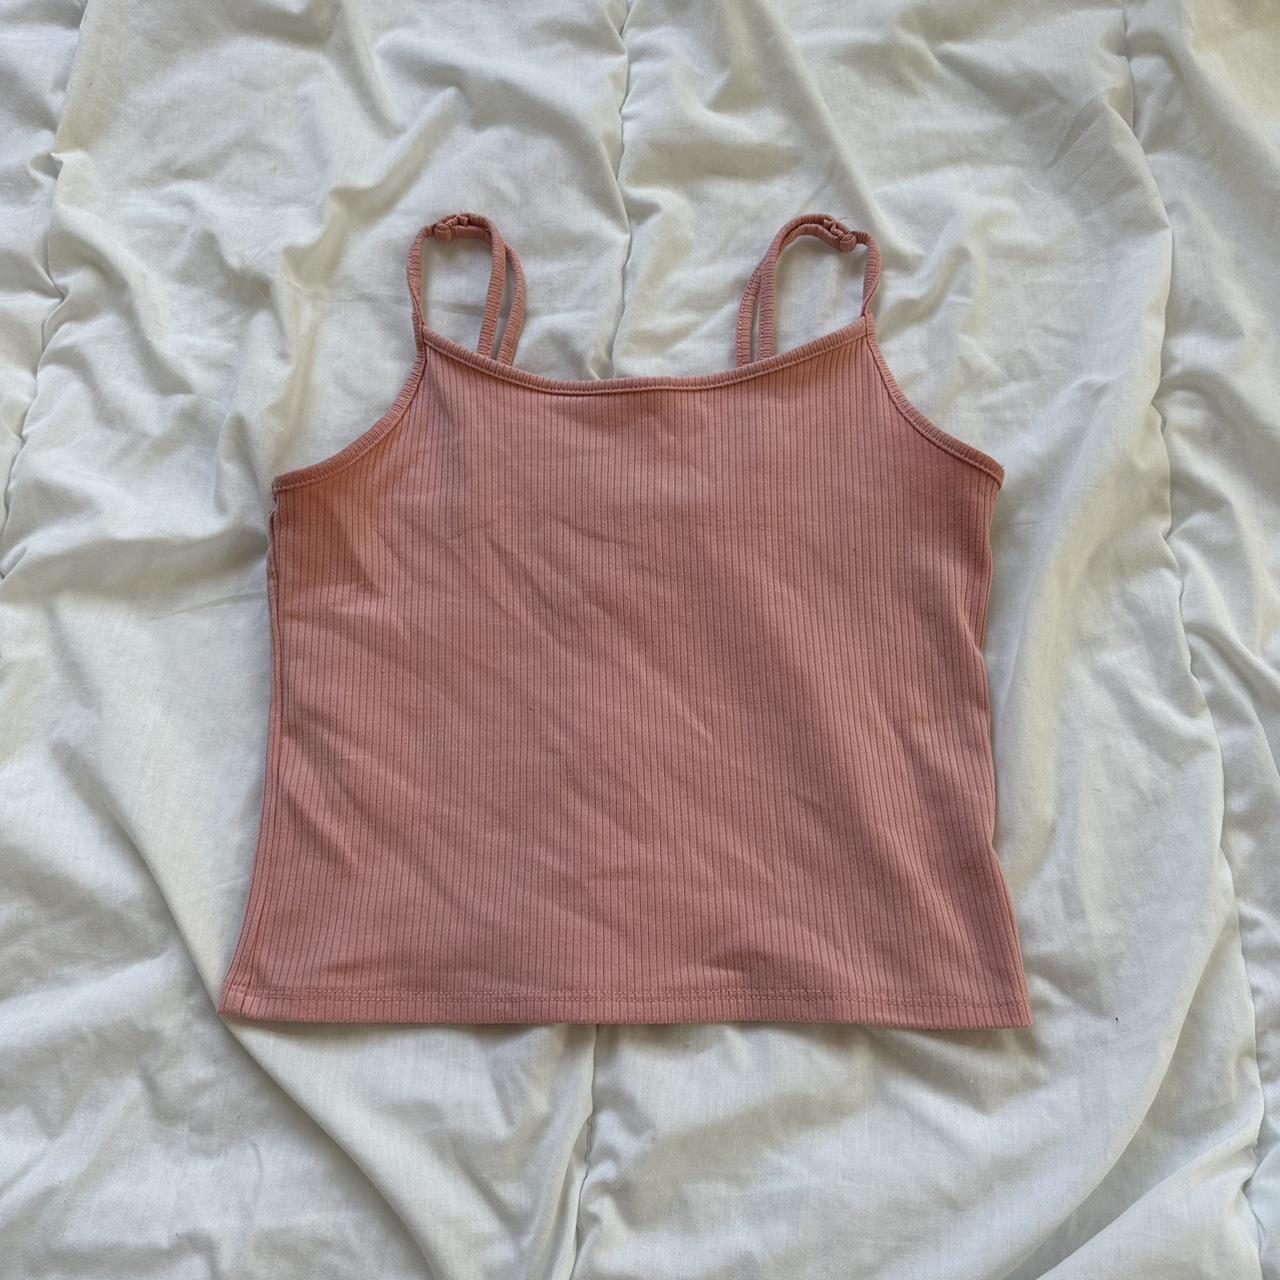 American Eagle Outfitters Women's Pink Vest | Depop